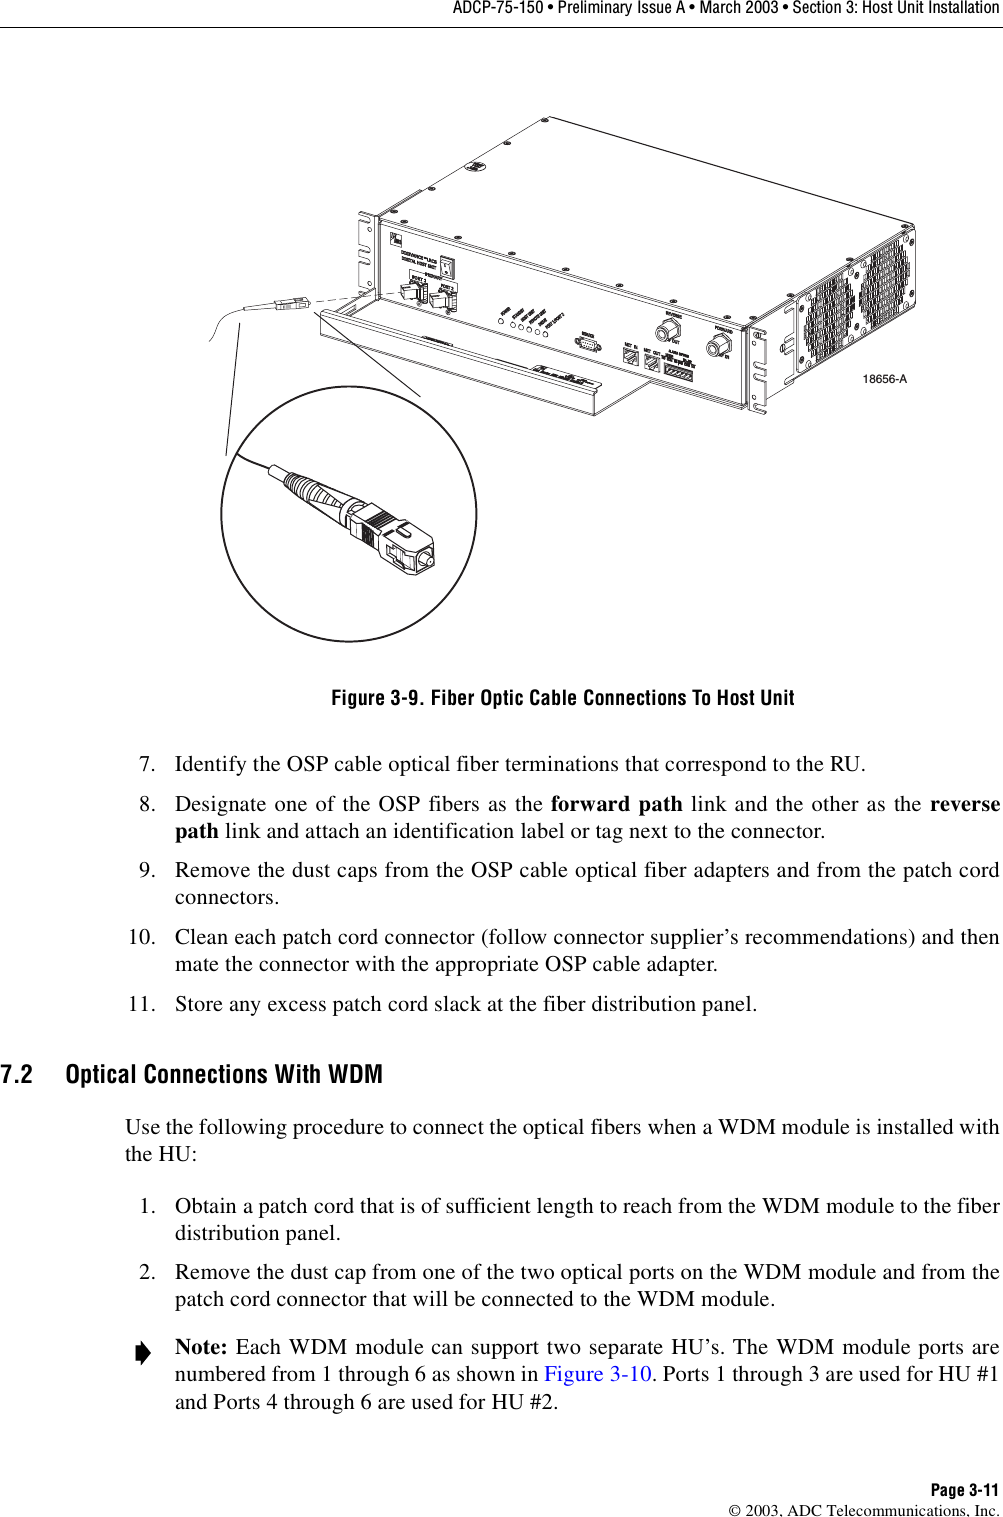 ADCP-75-150 • Preliminary Issue A • March 2003 • Section 3: Host Unit InstallationPage 3-11©2003, ADC Telecommunications, Inc.Figure 3-9. Fiber Optic Cable Connections To Host Unit7. Identify the OSP cable optical fiber terminations that correspond to the RU.8. Designate one of the OSP fibers as the forward path link and the other as the reversepath link and attach an identification label or tag next to the connector.9. Remove the dust caps from the OSP cable optical fiber adapters and from the patch cordconnectors.10. Clean each patch cord connector (follow connector supplier’s recommendations) and thenmate the connector with the appropriate OSP cable adapter.11. Store any excess patch cord slack at the fiber distribution panel.7.2 Optical Connections With WDMUse the following procedure to connect the optical fibers when aWDM module is installed withthe HU:1. Obtain apatch cord that is of sufficient length to reach from the WDM module to the fiberdistribution panel.2. Remove the dust cap from one of the two optical ports on the WDM module and from thepatch cord connector that will be connected to the WDM module.Note: Each WDM module can support two separate HU’s. The WDM module ports arenumbered from 1through 6as shown in Figure 3-10.Ports 1through 3are used for HU #1and Ports 4through 6are used for HU #2.18656-A